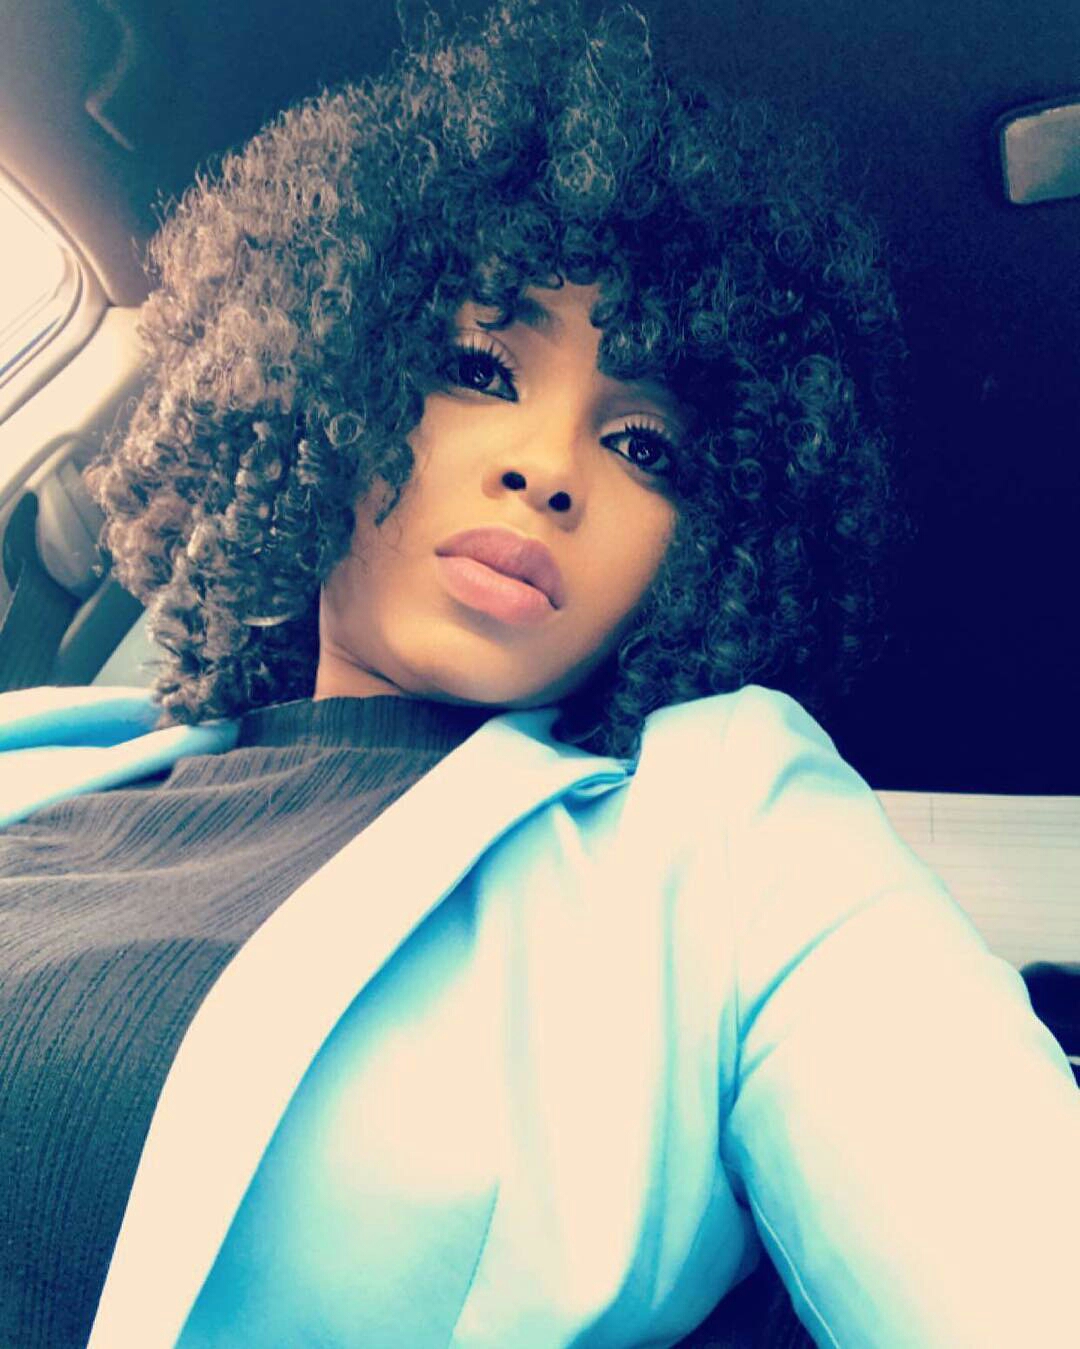 Singer Chidinma Rocks New Hairstyle In This Adorable Selfie